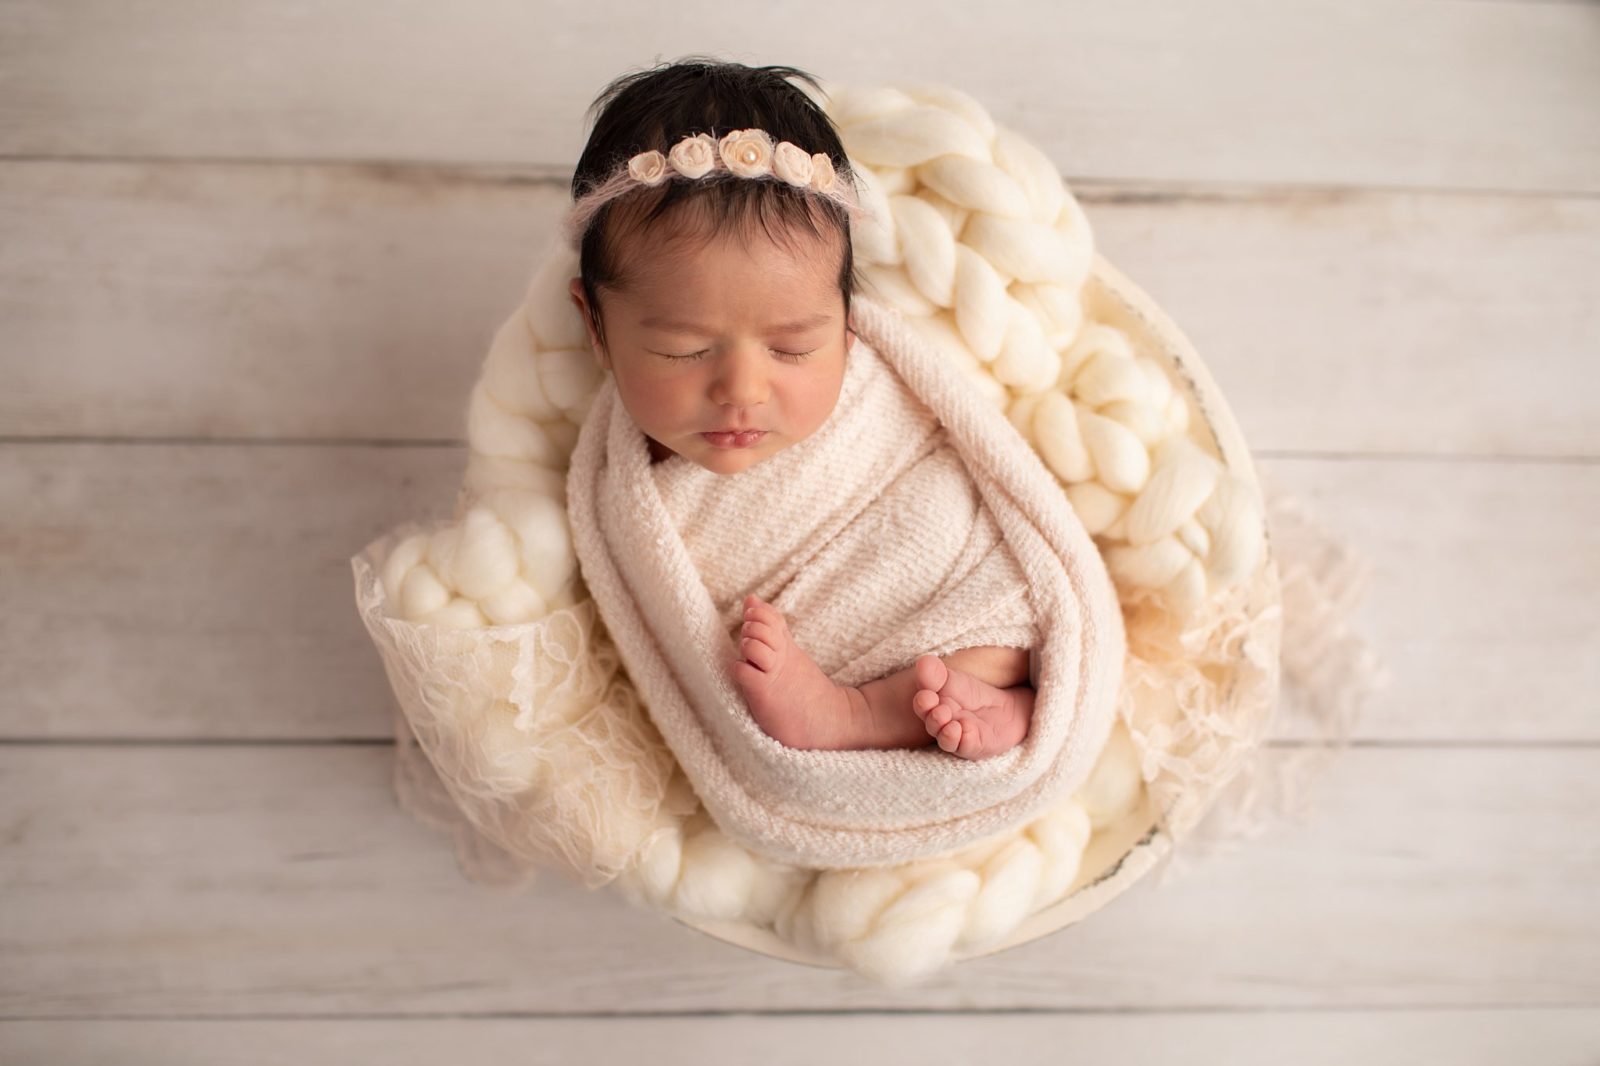 Ellie headband on a newborn baby girl in a bowl made by Rebecca Leigh Studio